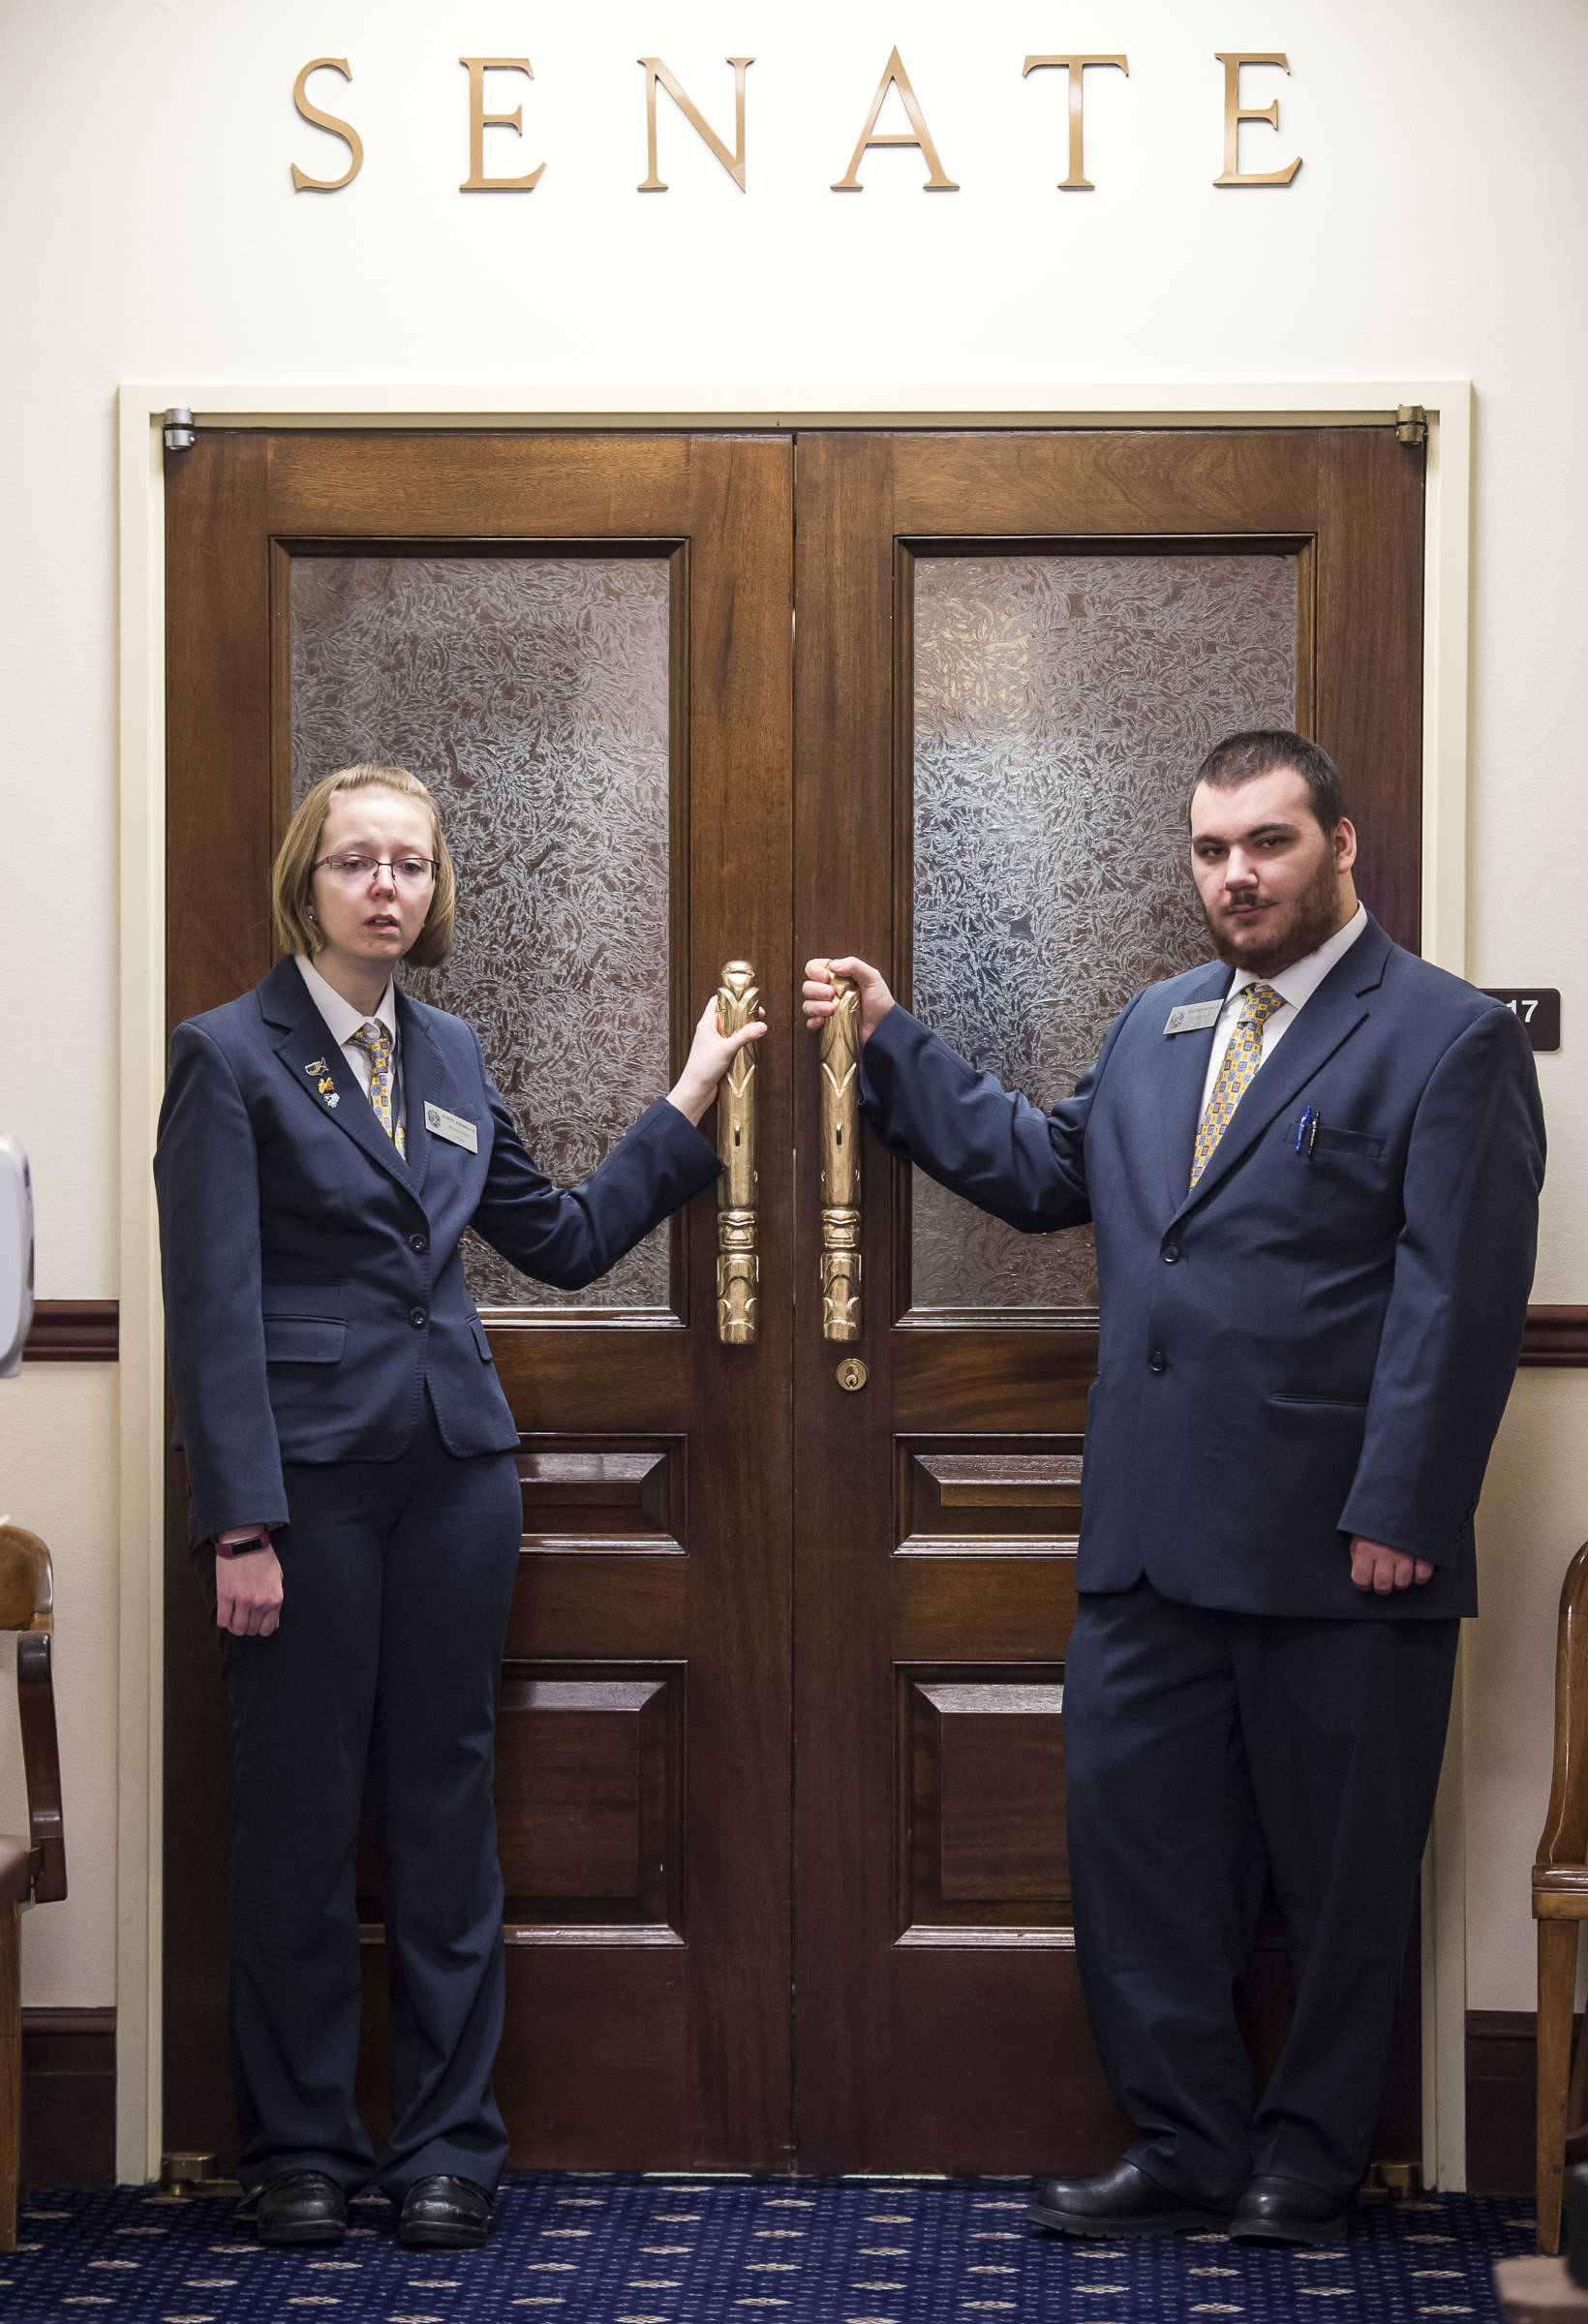 Senate Pages Sydney Krebsbach, left, and Matthew Puckett dressed for work at the Capitol on Wednesday, Jan. 23, 2019. (Michael Penn | Juneau Empire)